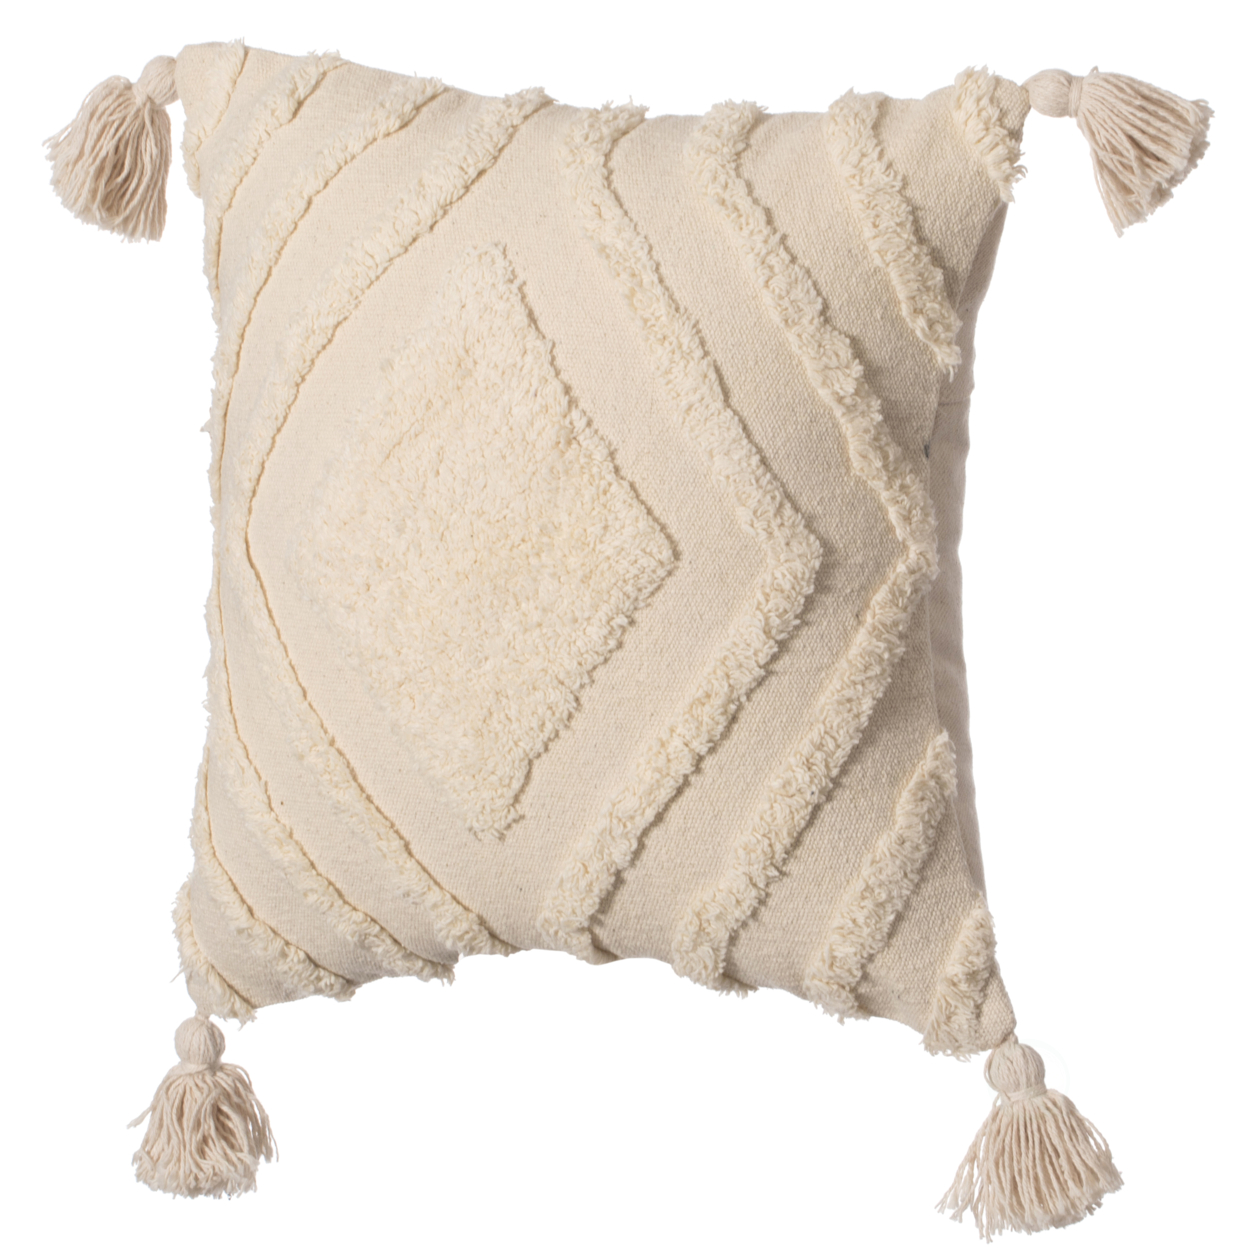 16 Handwoven Cotton Throw Pillow Cover With White On White Tufted Design And Tassel Corners - Lattice